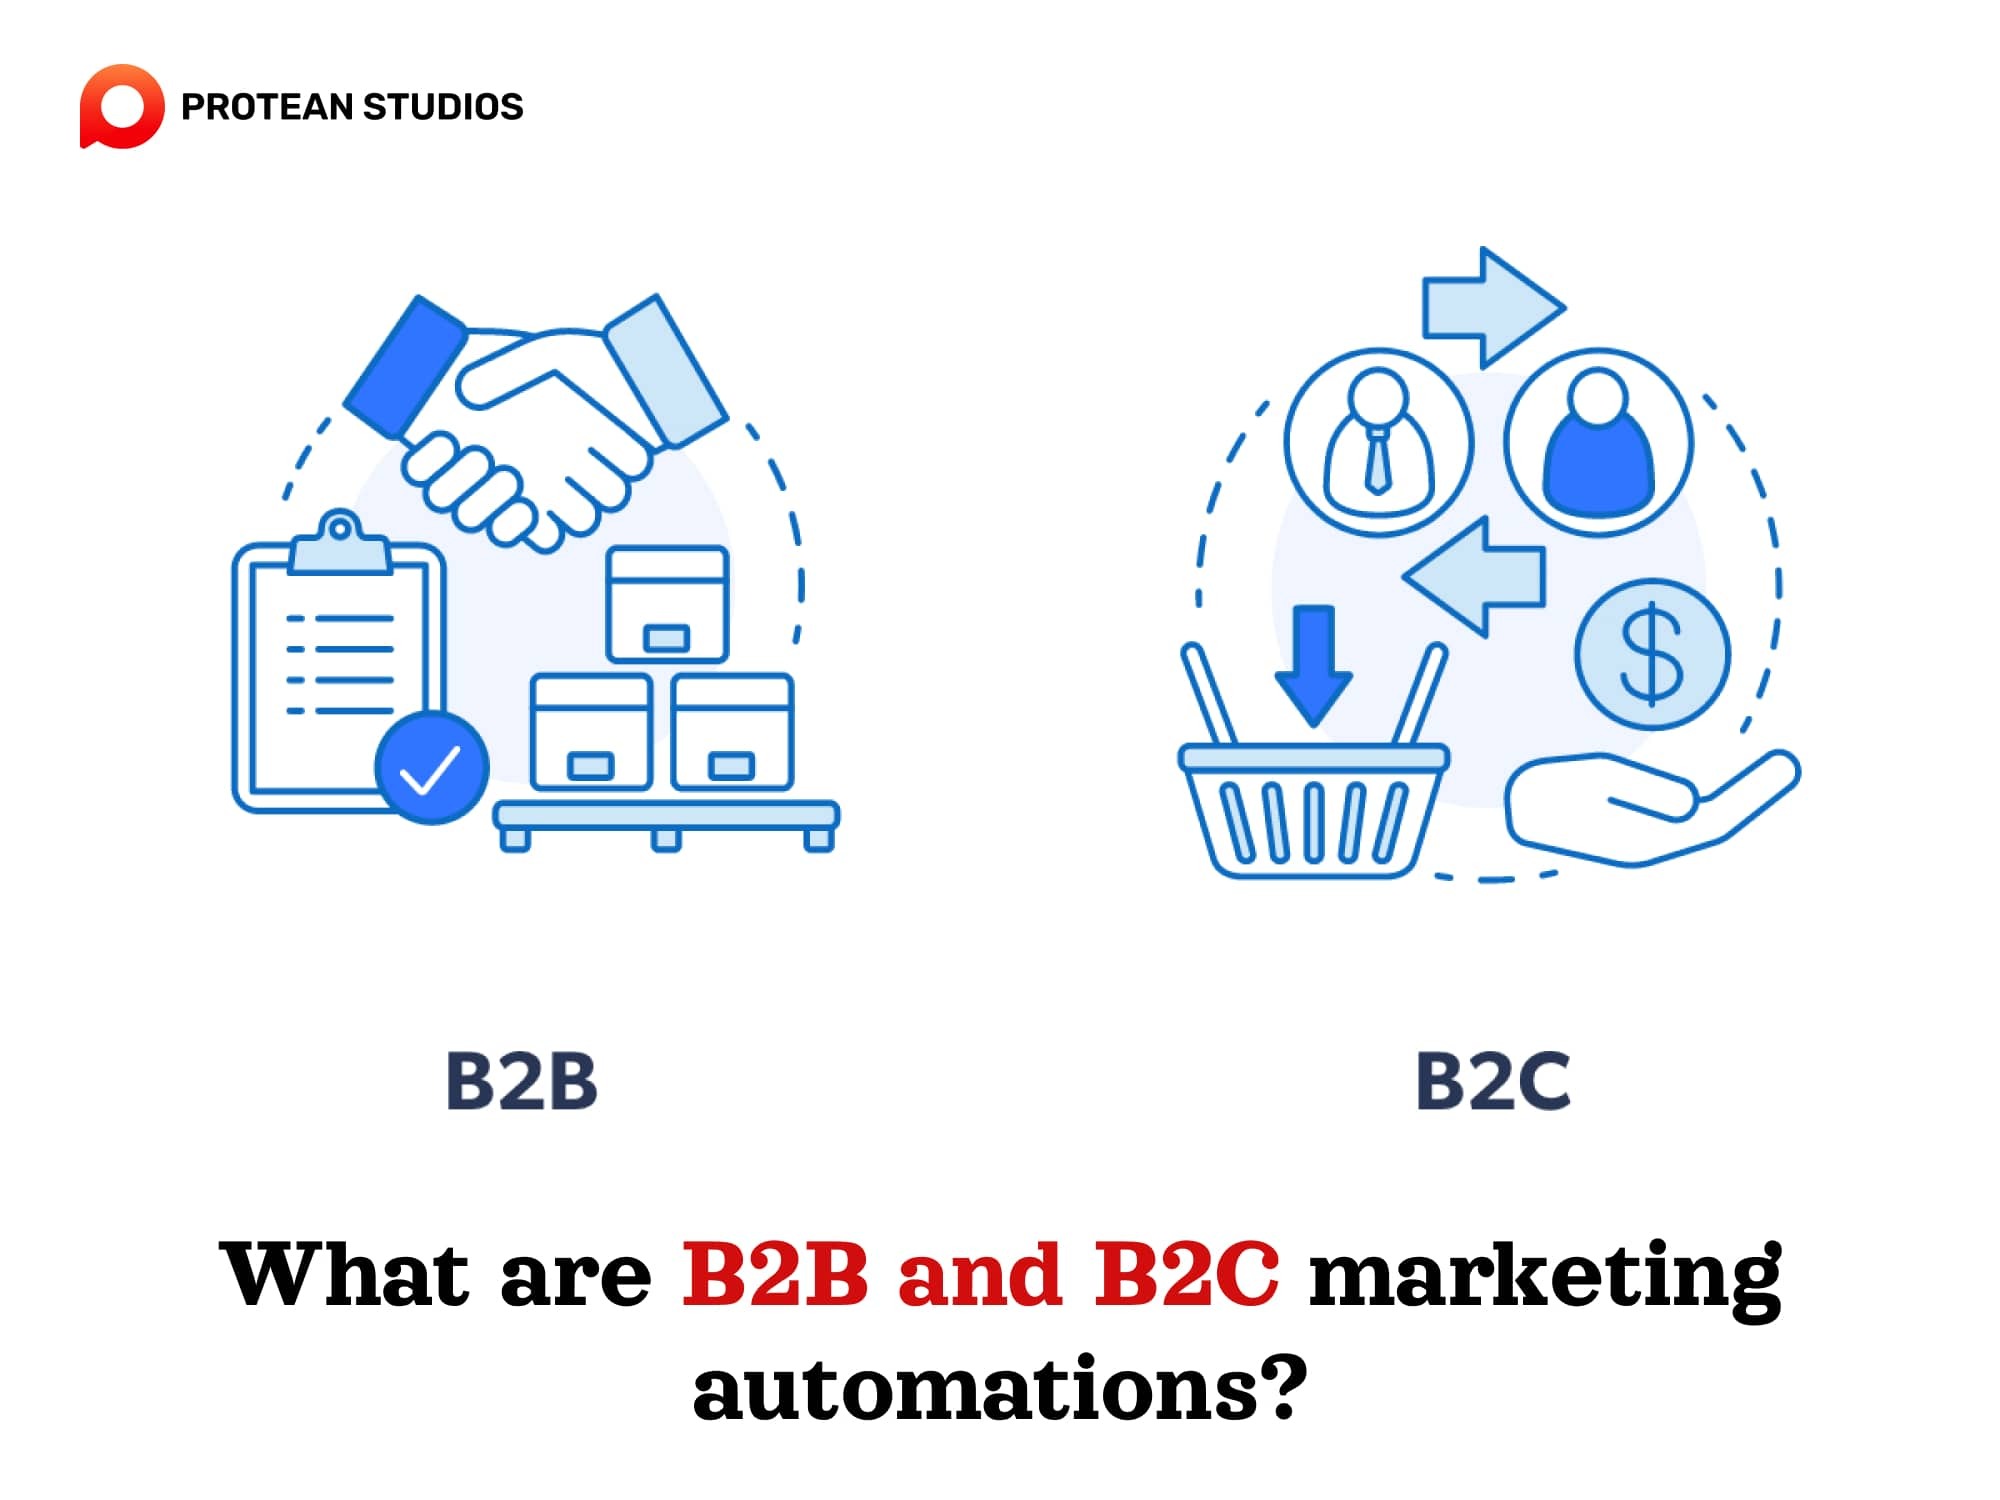 The overview of the B2B and B2C marketing models